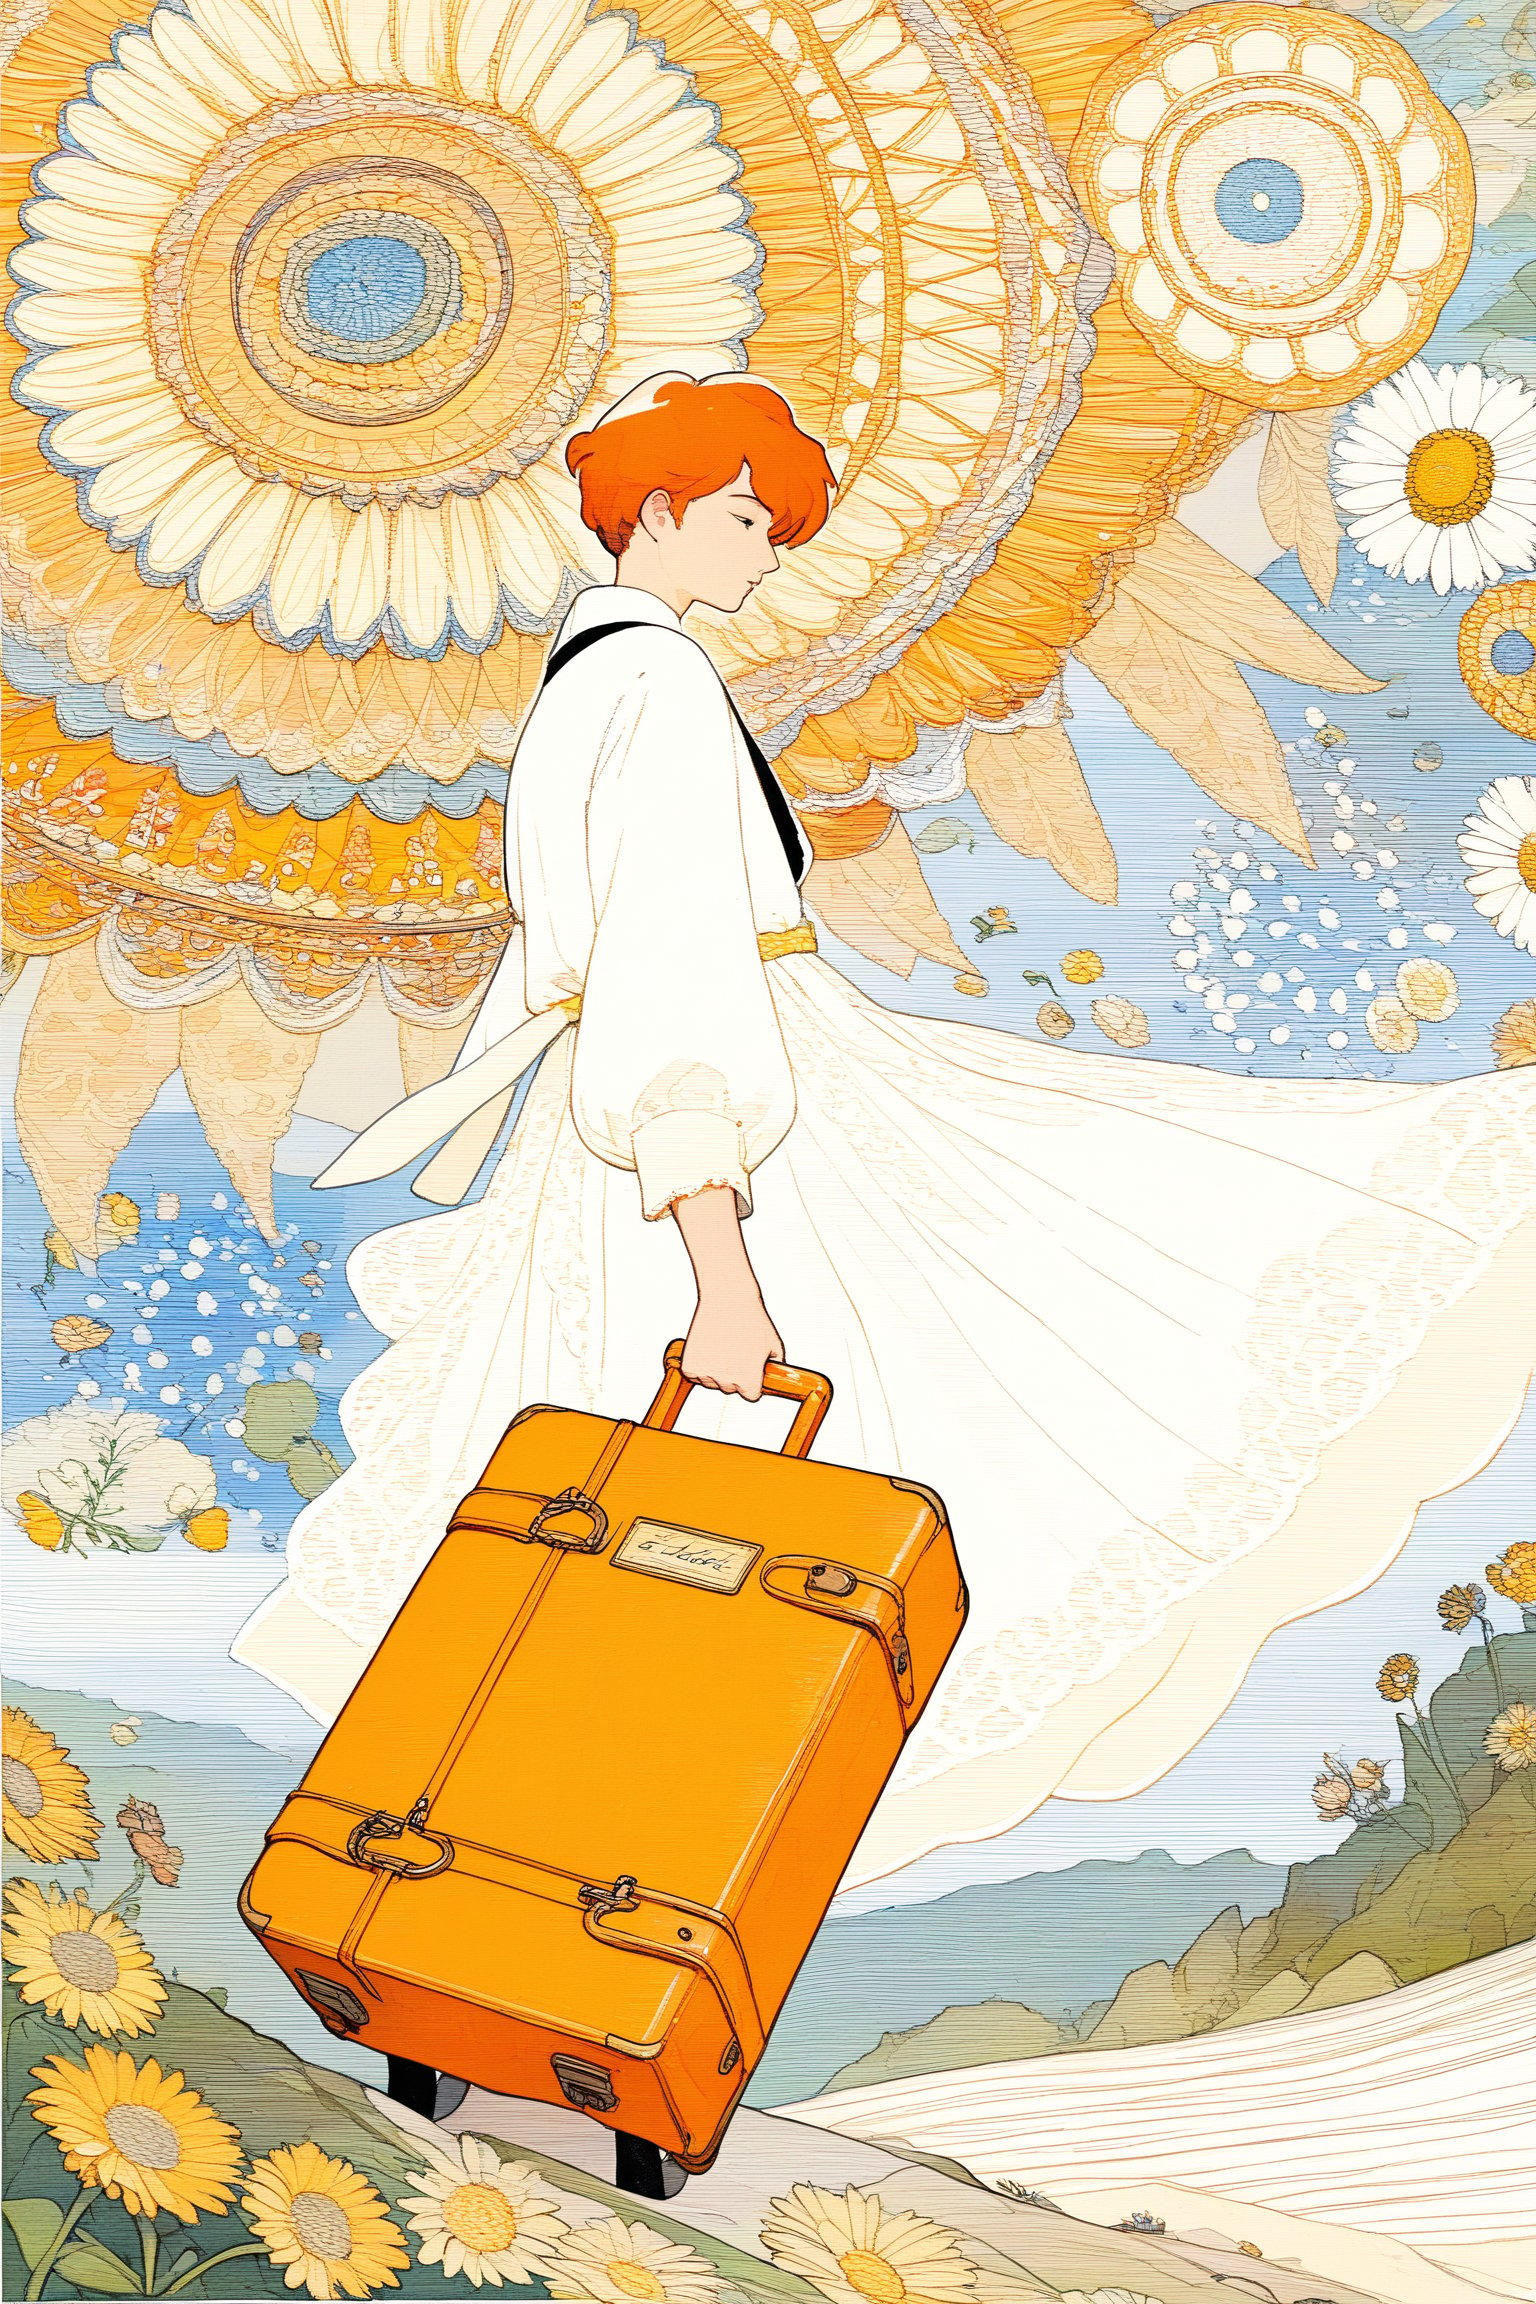 A young man, carefree figure walks towards the edge of a cliff, looking up at the sky. He is carrying a light backpack and is about to take a confident step into the void. In her right hand she holds a white flower while in her left an orange suitcase, fractal art (tarot card design), botanical illustration, sunflowers, classic and elegant flourish, Lofi artistic style, vintage, [(text that says "EL LOCO")], best quality, masterpiece, extremely detailed and intricate details,